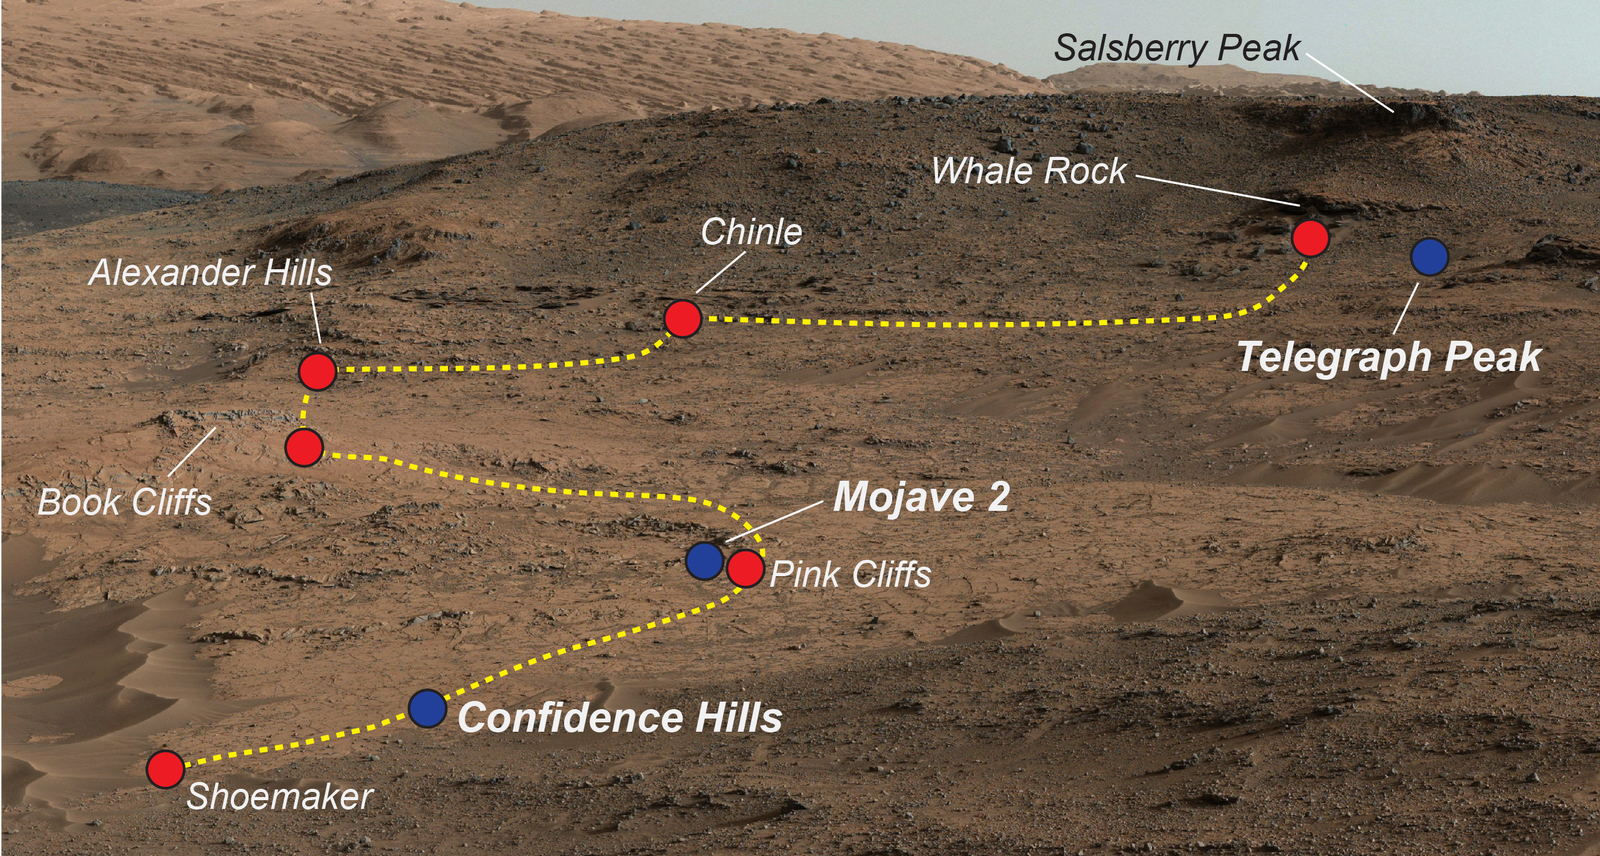 NASA's Curiosity Mars rover examined a mudstone outcrop area called "Pahrump Hills" on lower Mount Sharp, in 2014 and 2015.  This view shows locations of some targets the rover studied there. The blue dots indicate where drilled samples of powdered rock were collected for analysis.